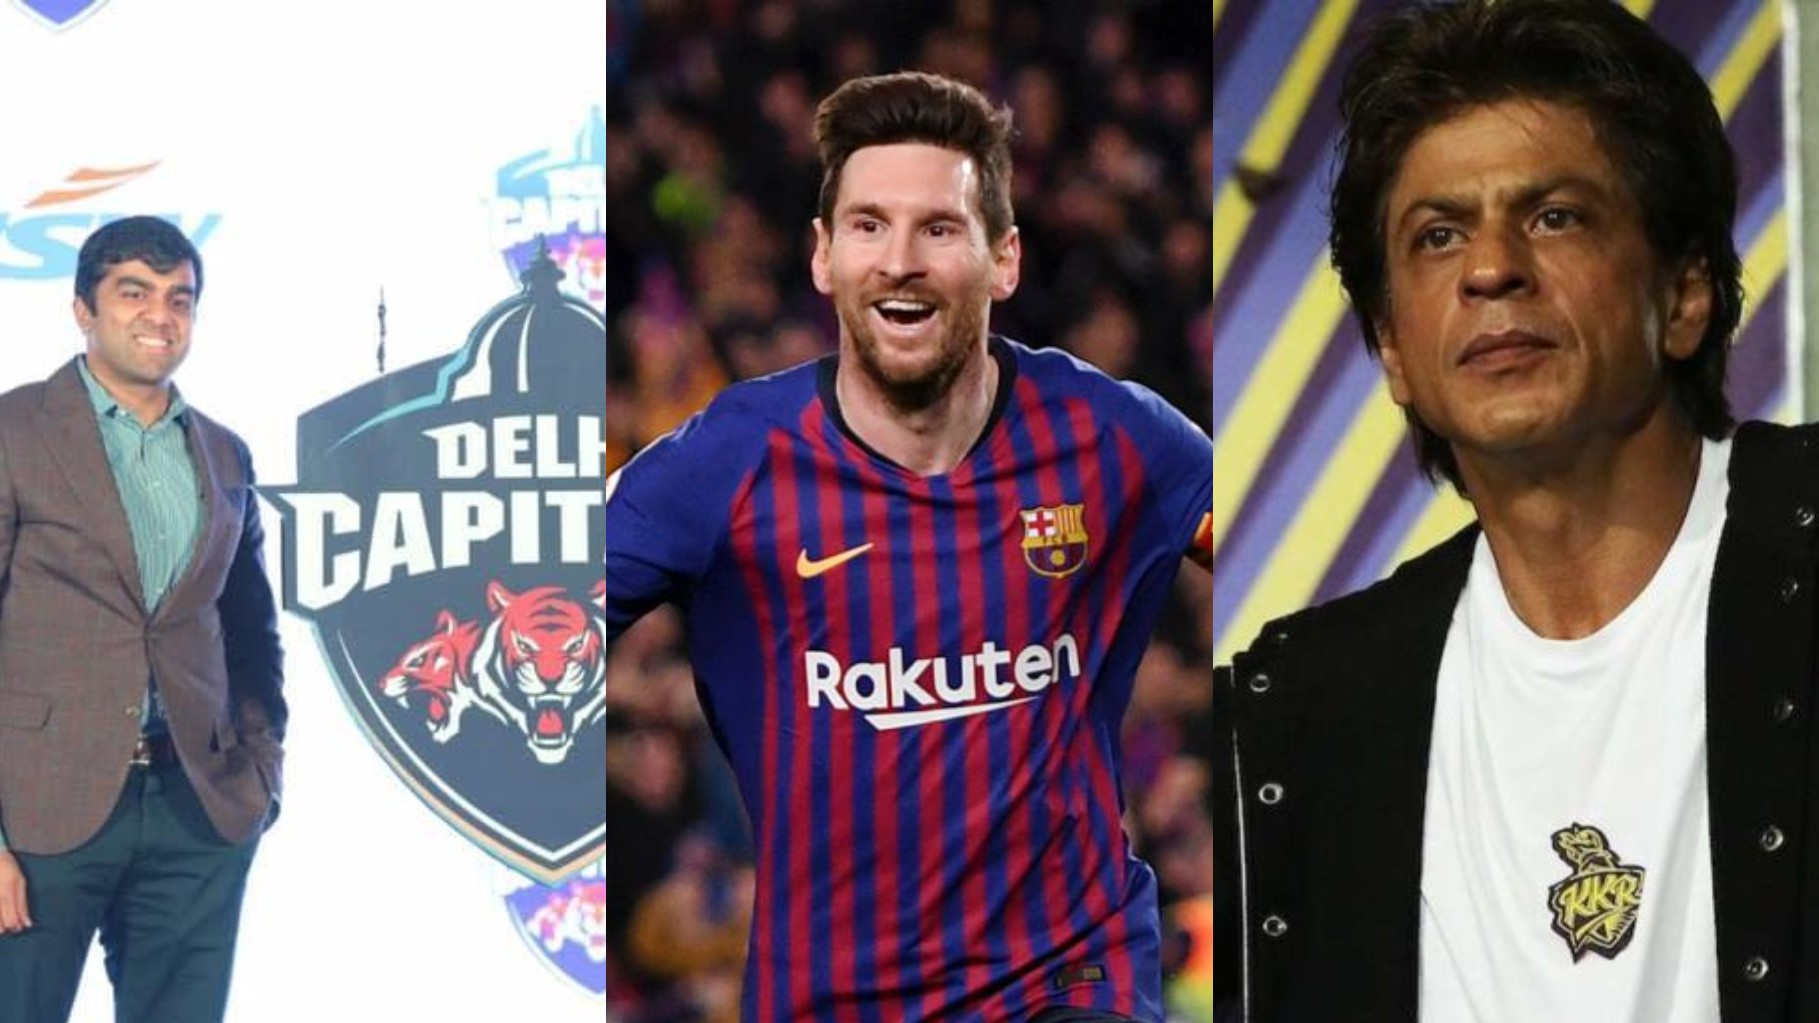 Delhi Capitals and Kolkata Knight Riders react hilariously to Lionel Messi's departure from FC Barcelona